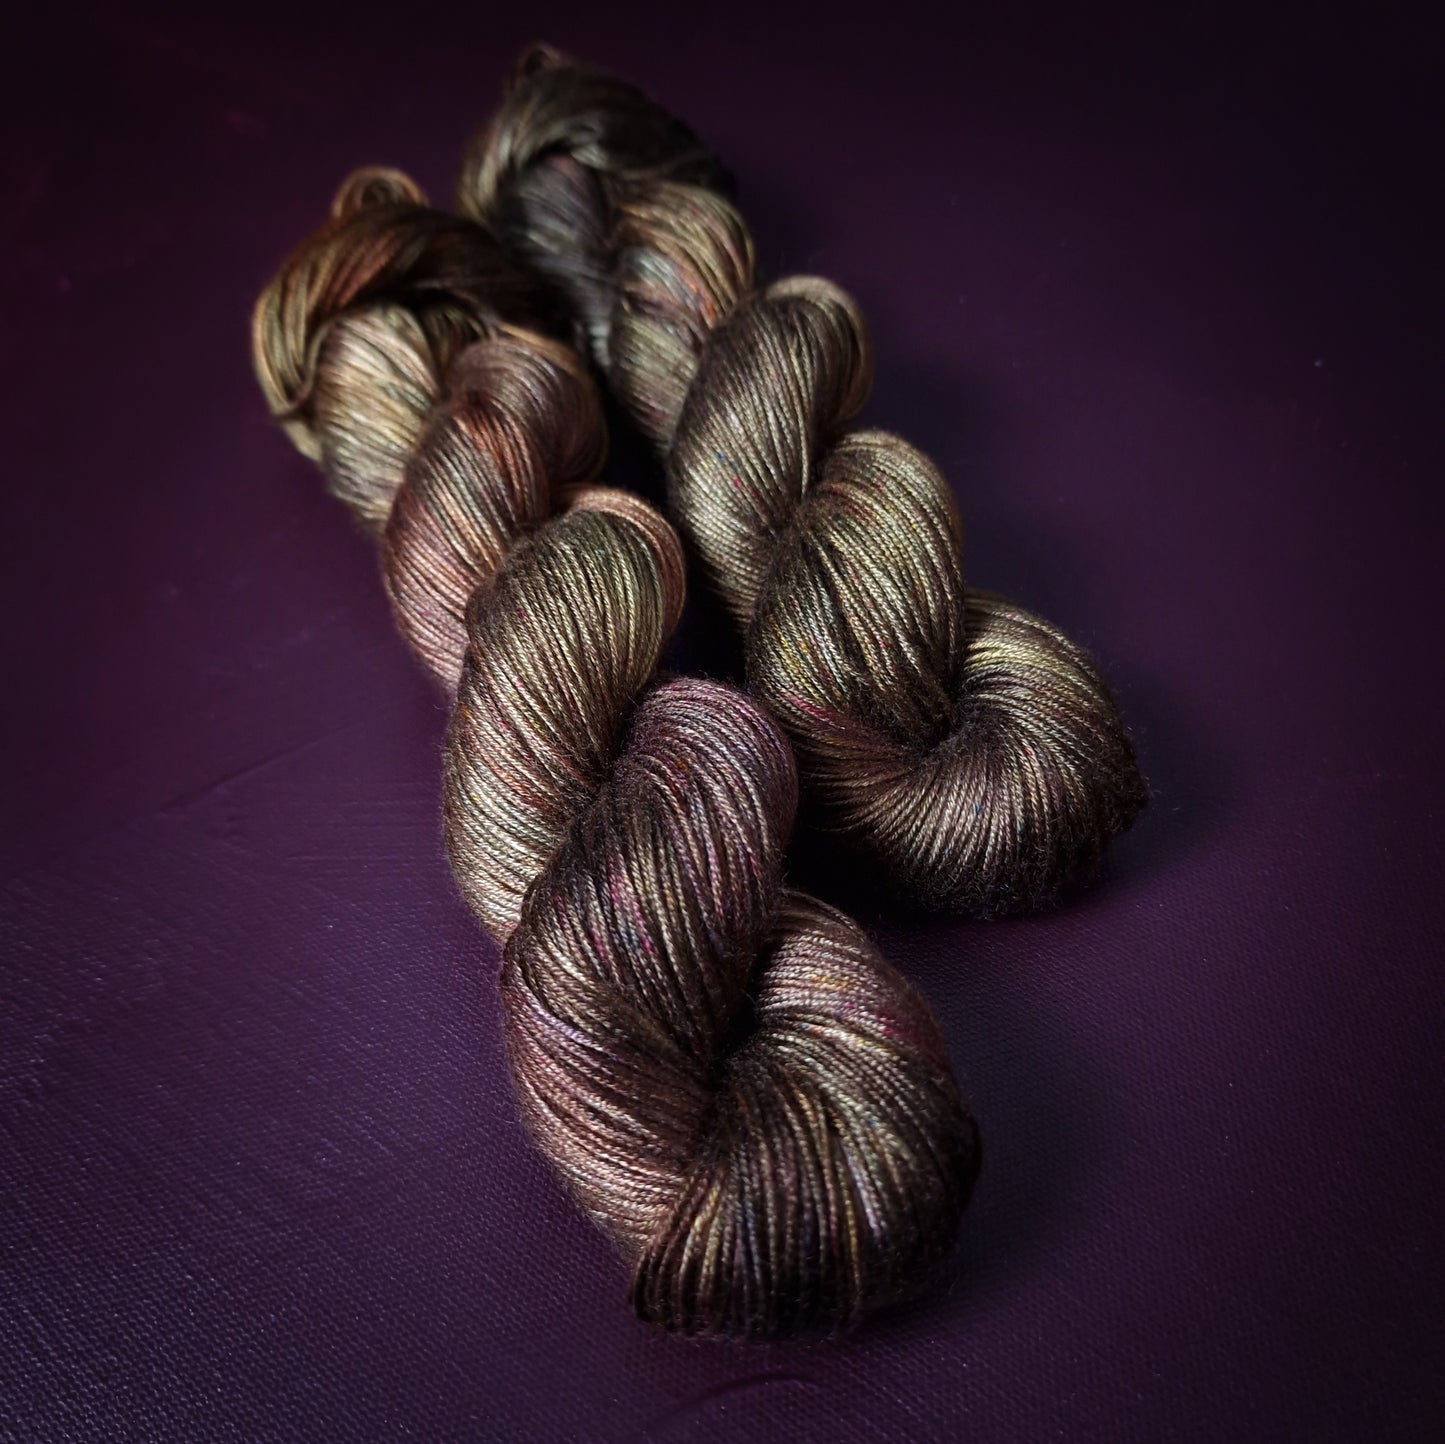 Hand dyed yarn ~ Natures Embrace *** Dyed to order ~ fingering / DK weight tencel OR bamboo yarn, vegan, hand painted